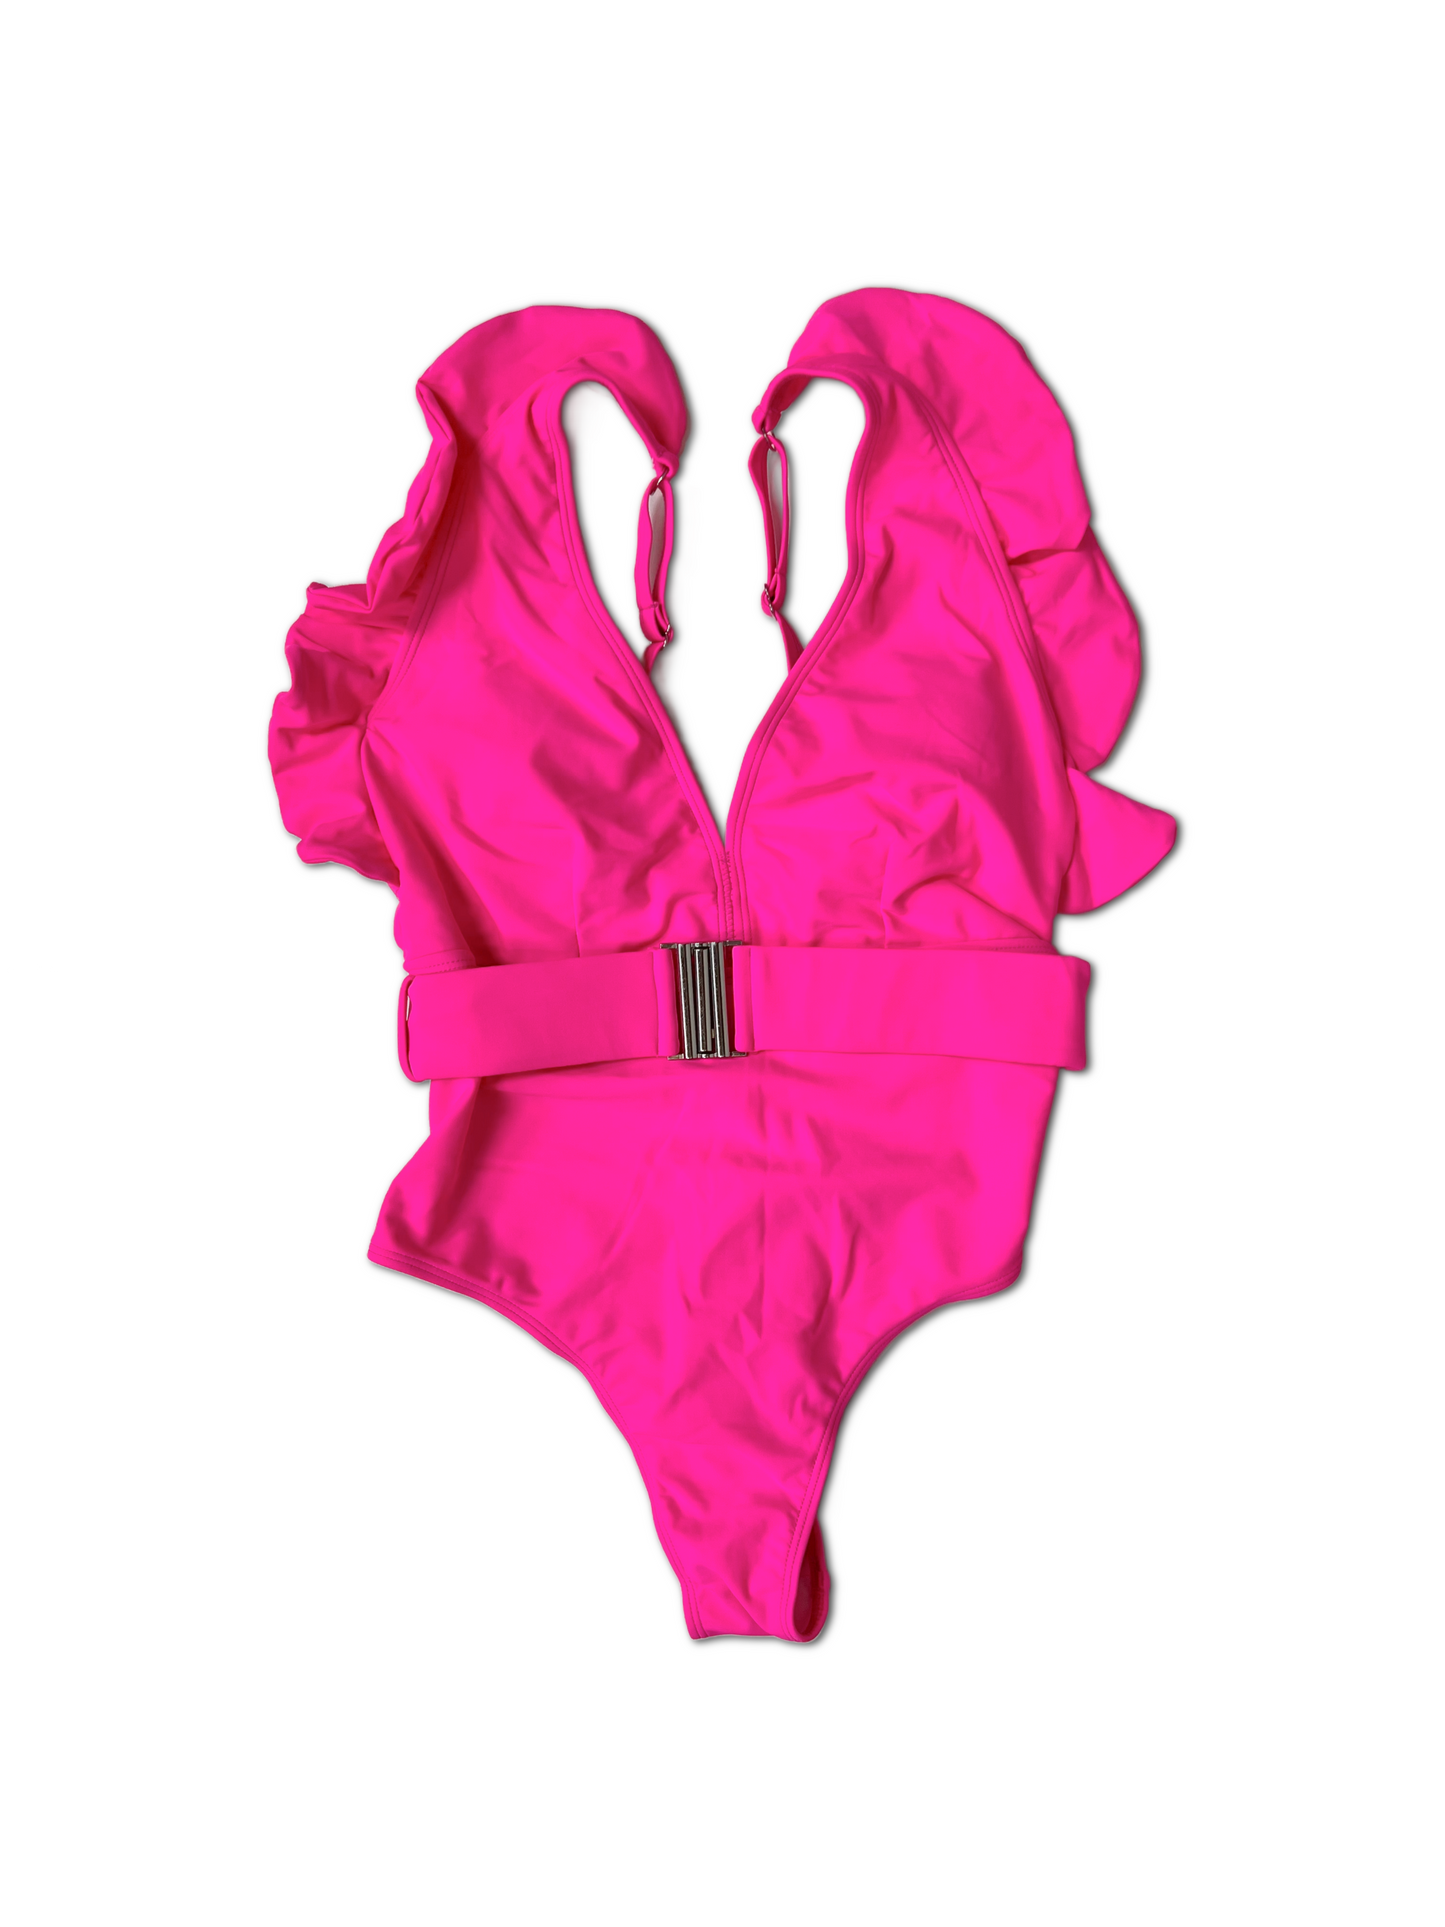 (Preorder) Wet Republic Swimsuit, Hot Pink (S-3X)